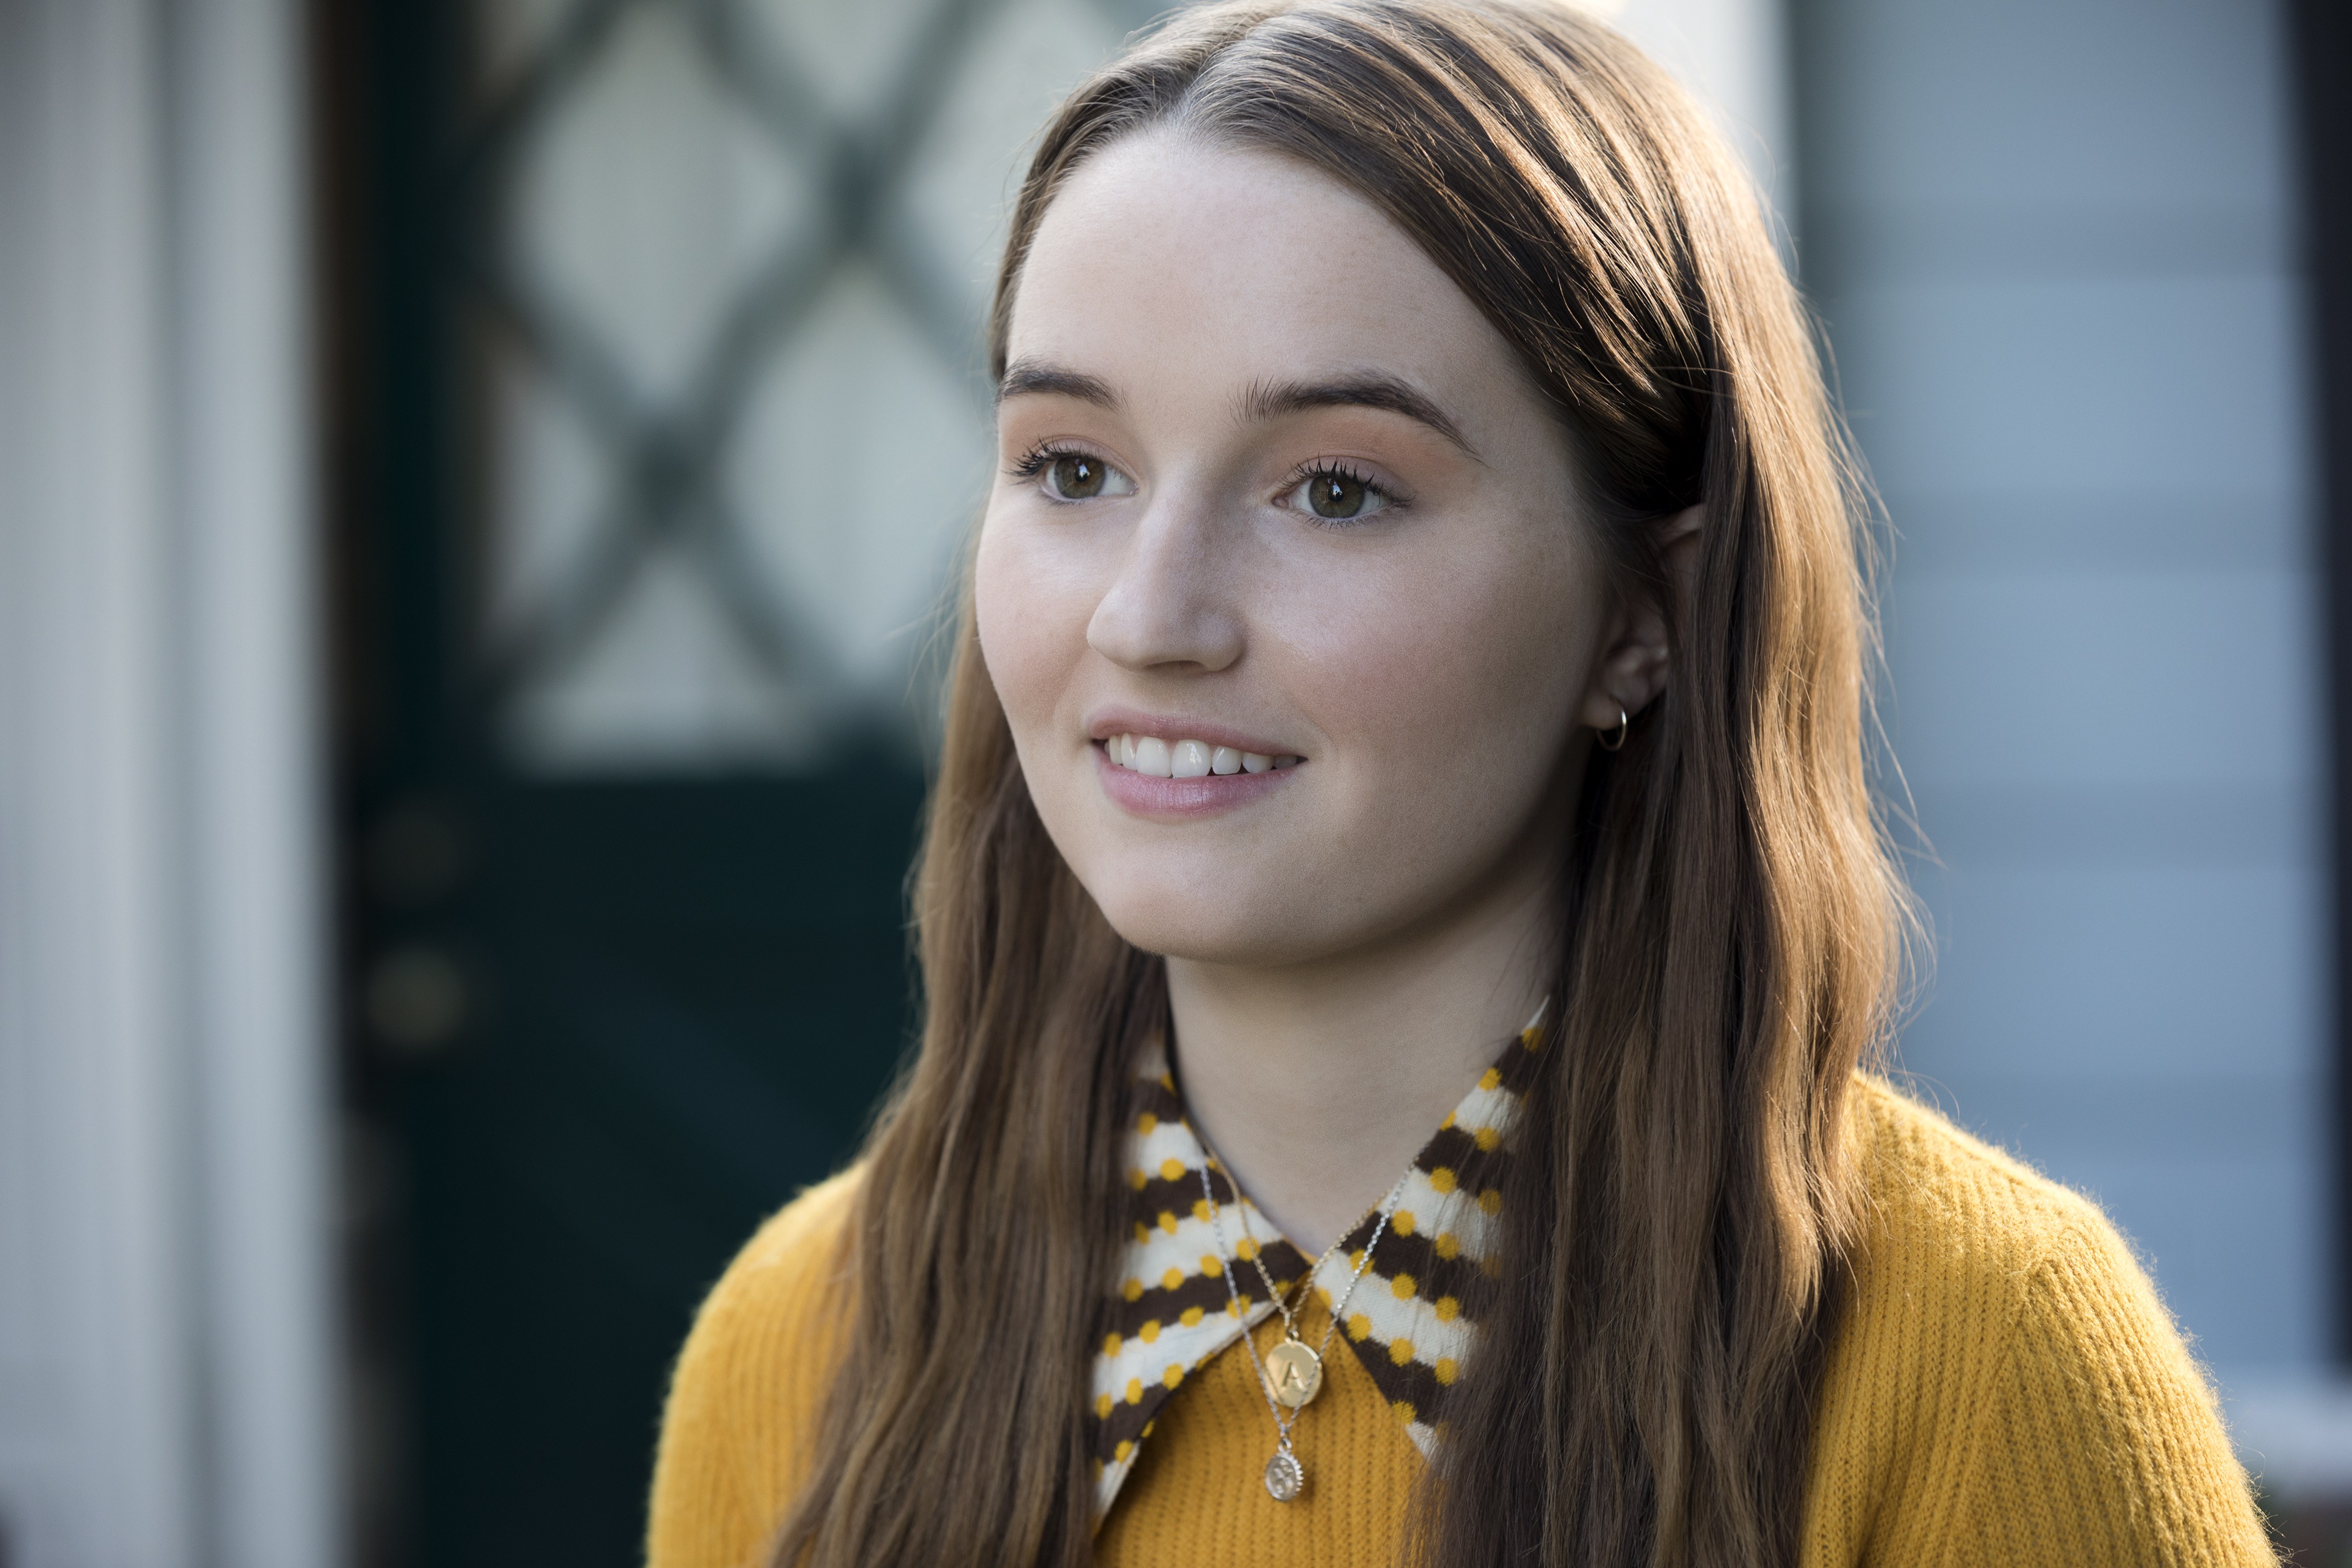 Booksmart Star Kaitlyn Dever on What Makes the Movie So